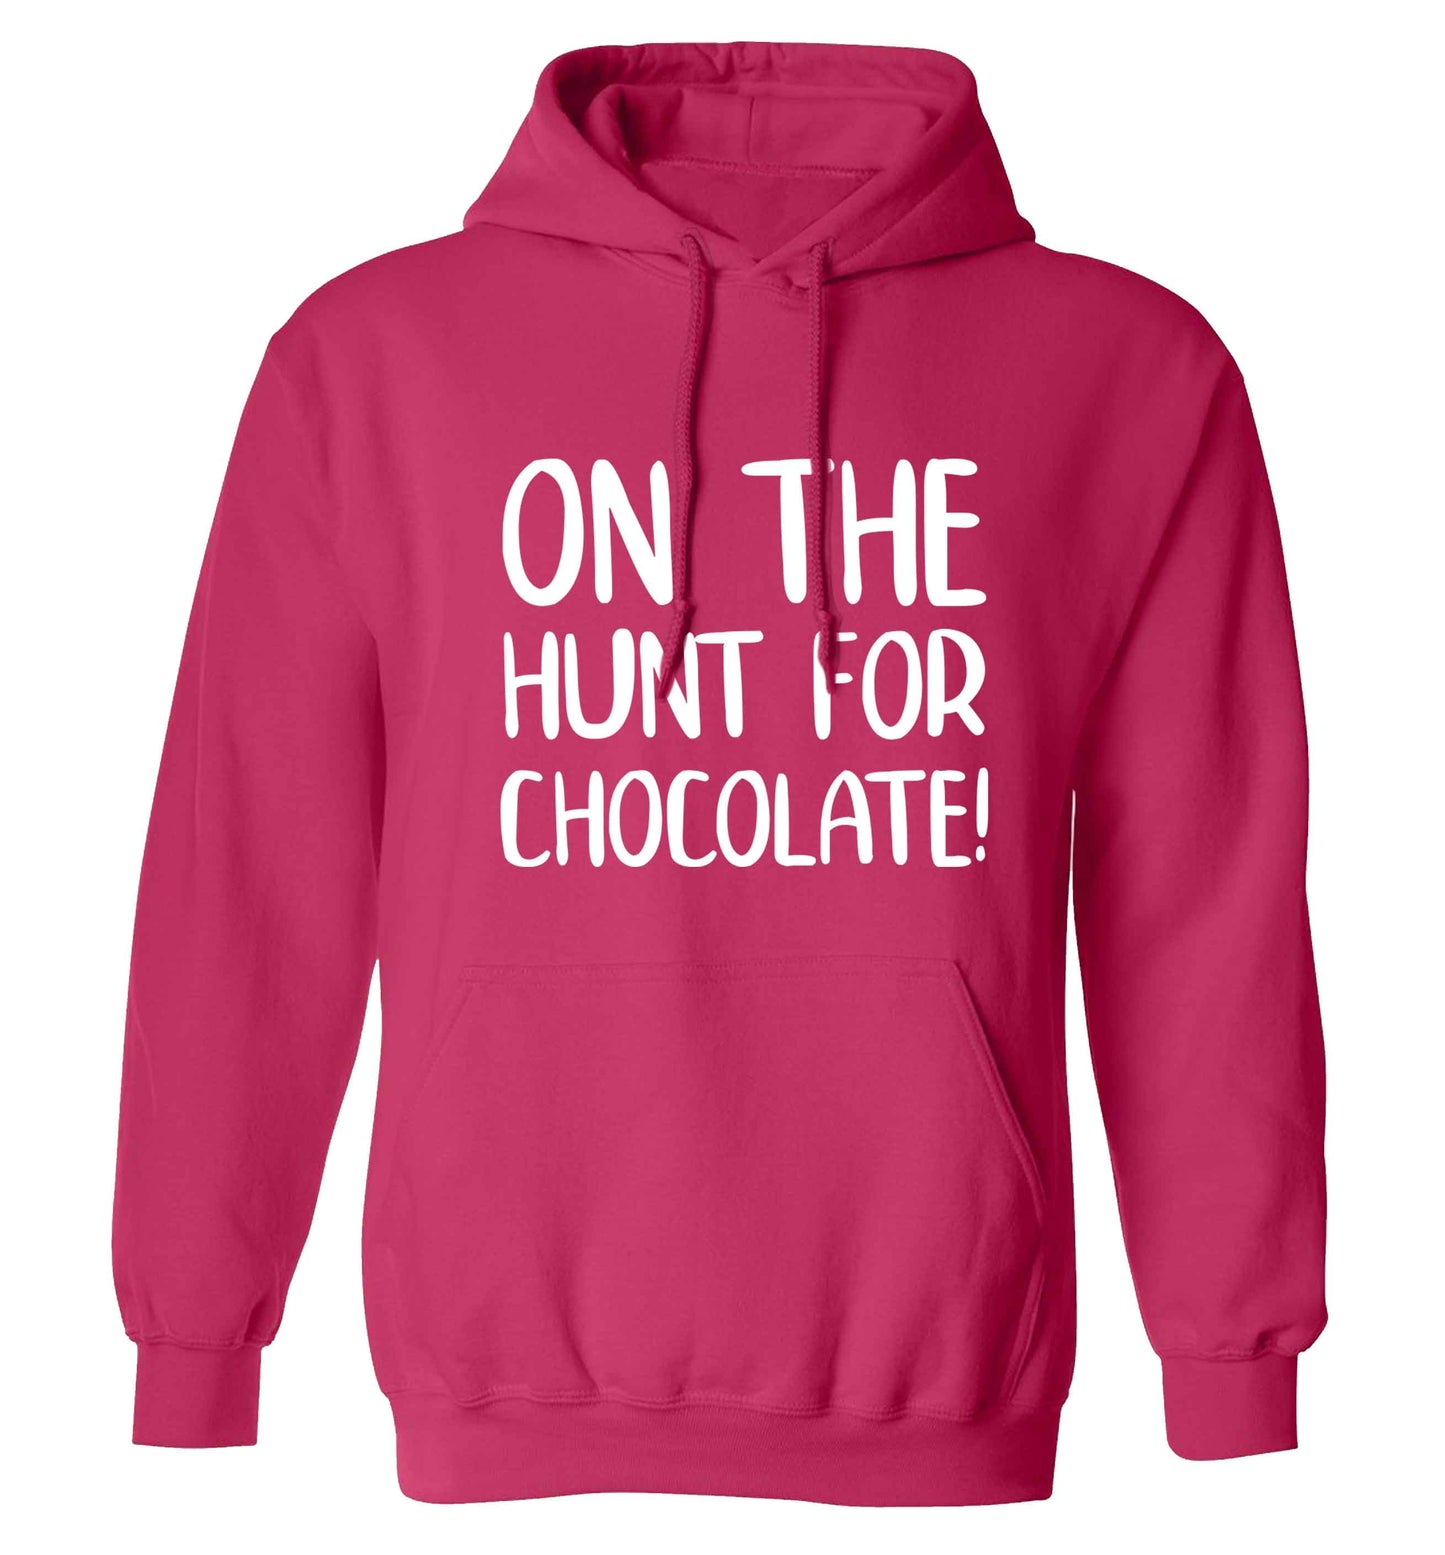 On the hunt for chocolate! adults unisex pink hoodie 2XL